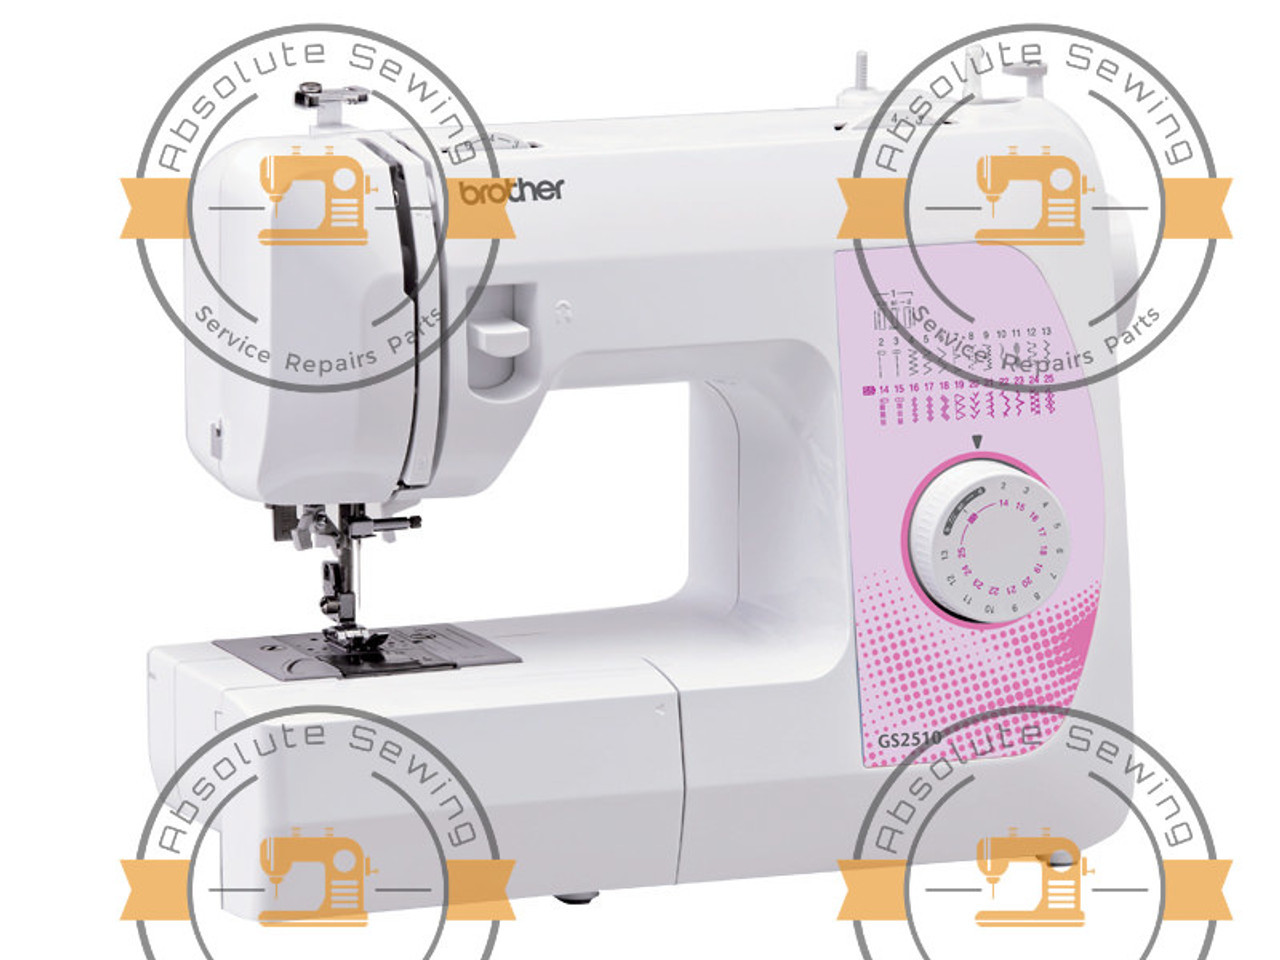 Brother Home sewing machine - GS2510 and $40 Brother Cashback